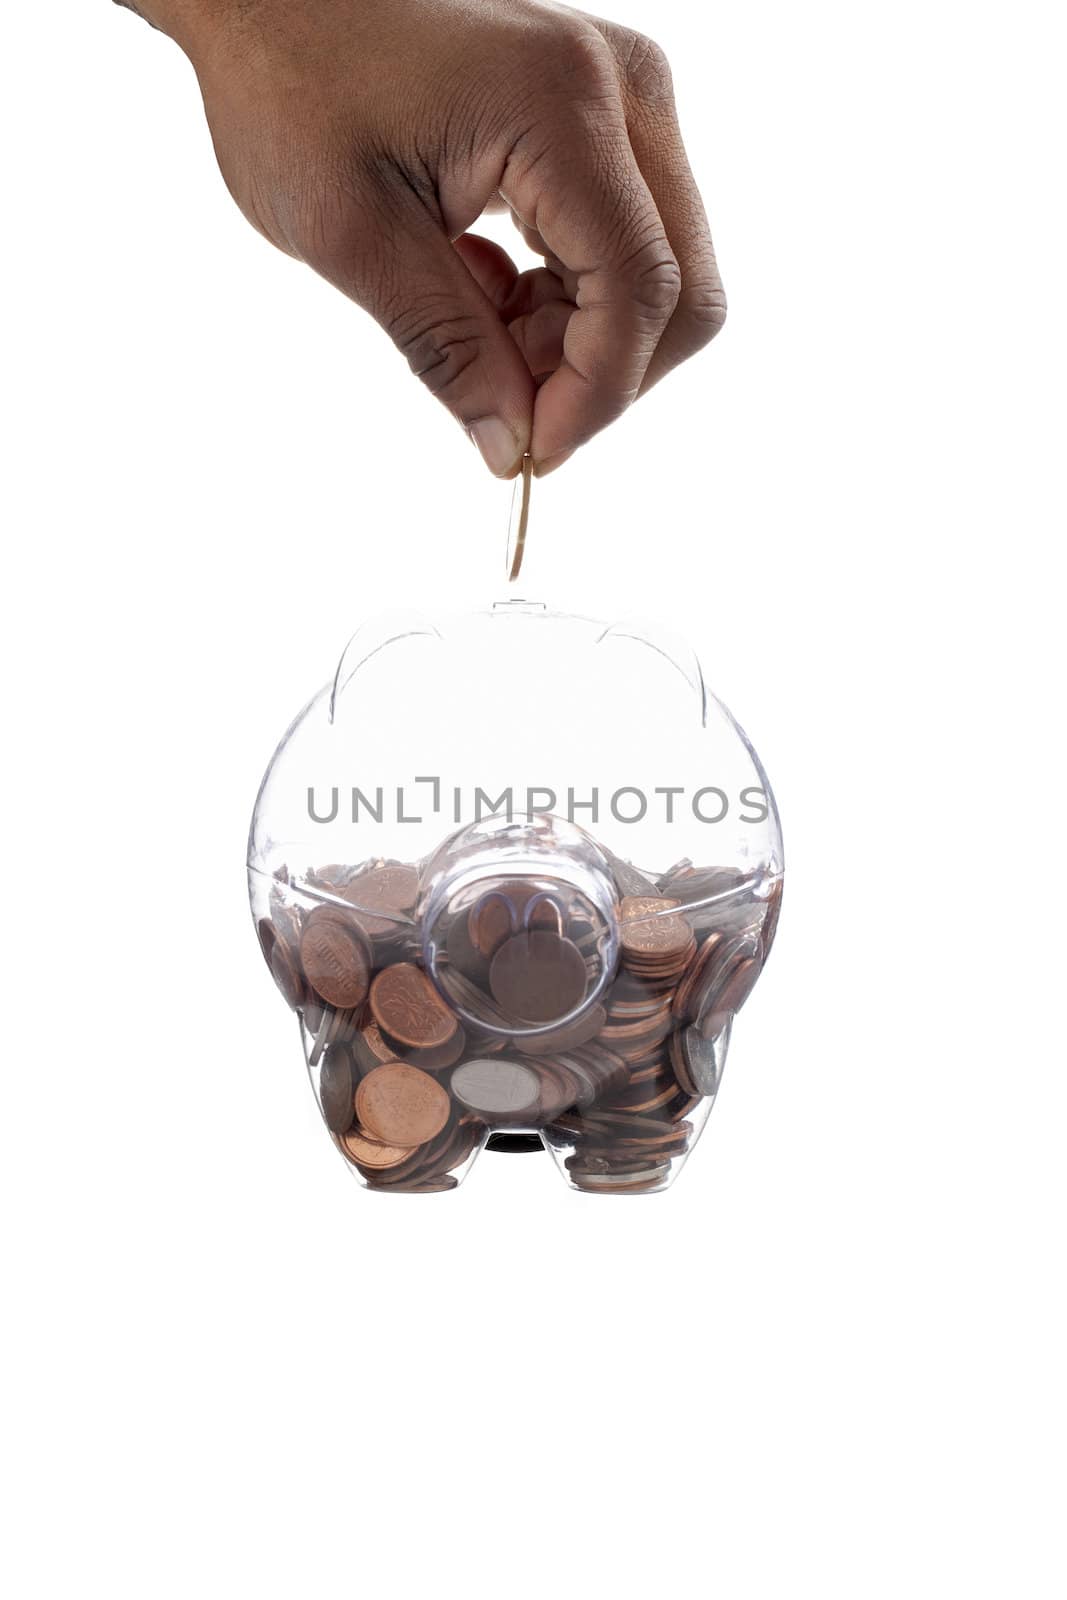 Gold coin inserting on a piggy bank using by the human hand